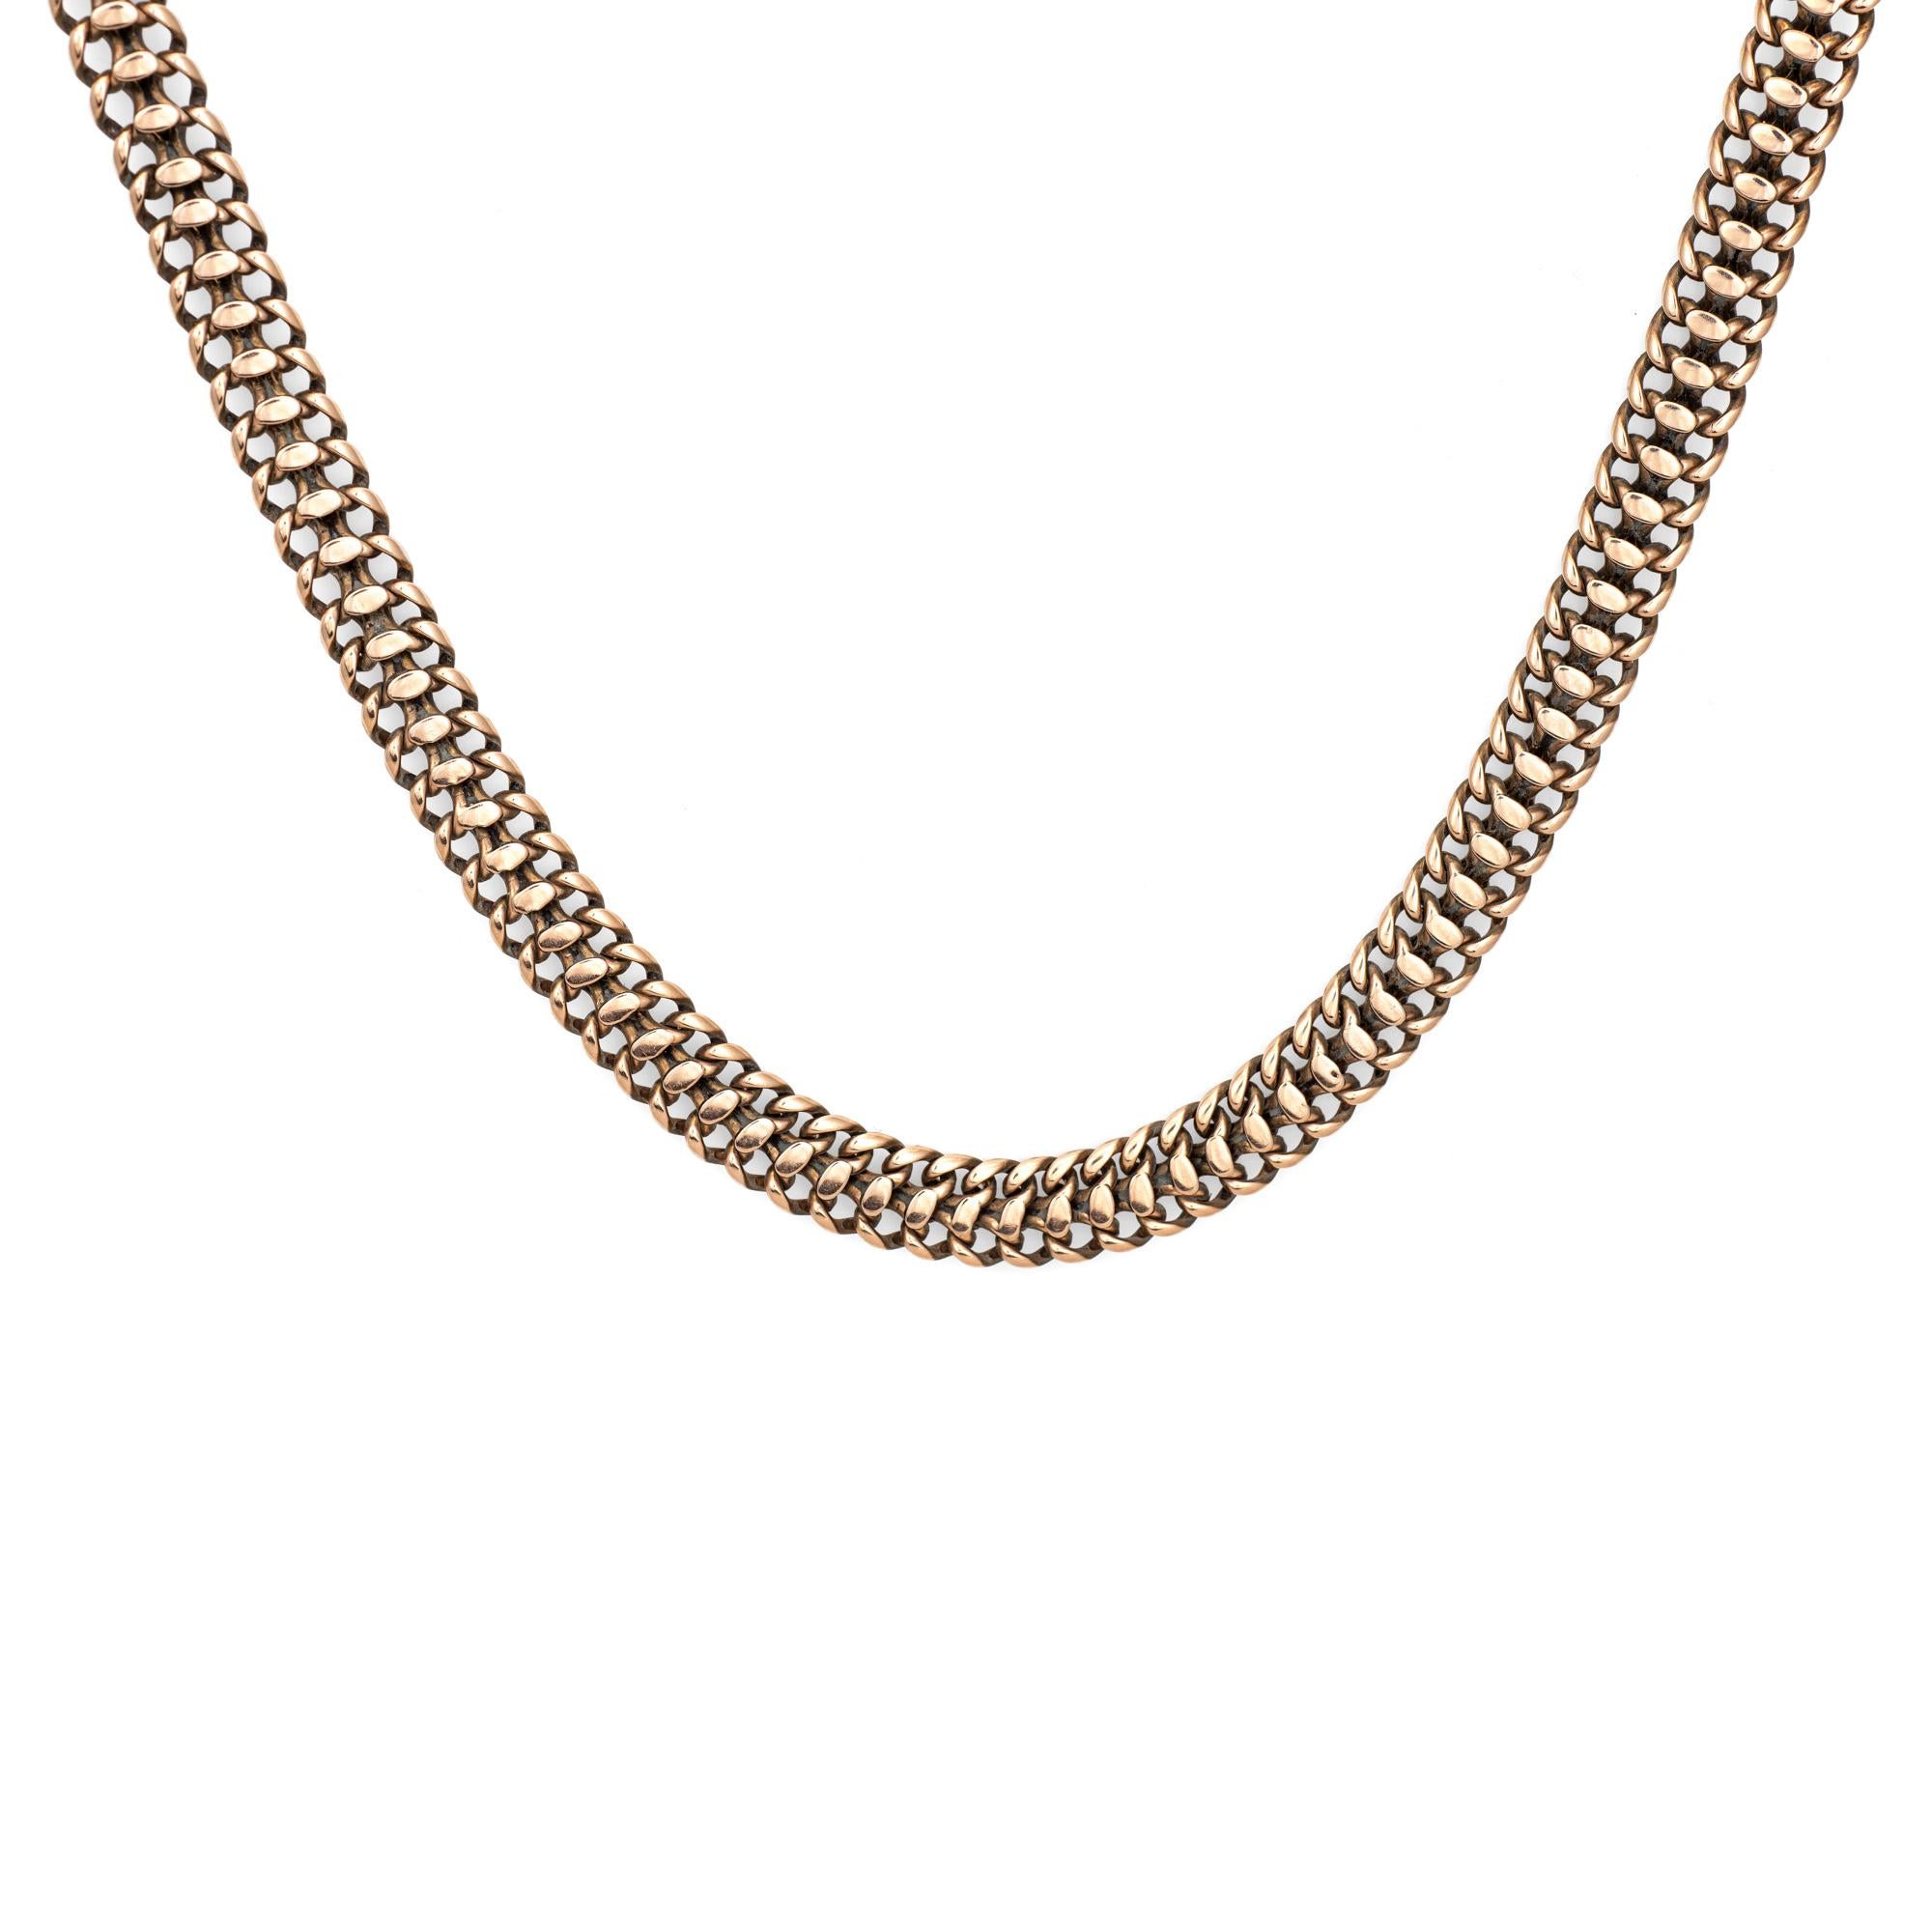 Stylish and finely detailed antique Victorian fancy link necklace crafted in 14k & 9k rose gold (circa 1880s to 1900s).  

The hefty fancy link necklace weighs 42.9 grams and features wide flat links (8.5mm - 0.33 inches) crafted in rosy 14k & 9k